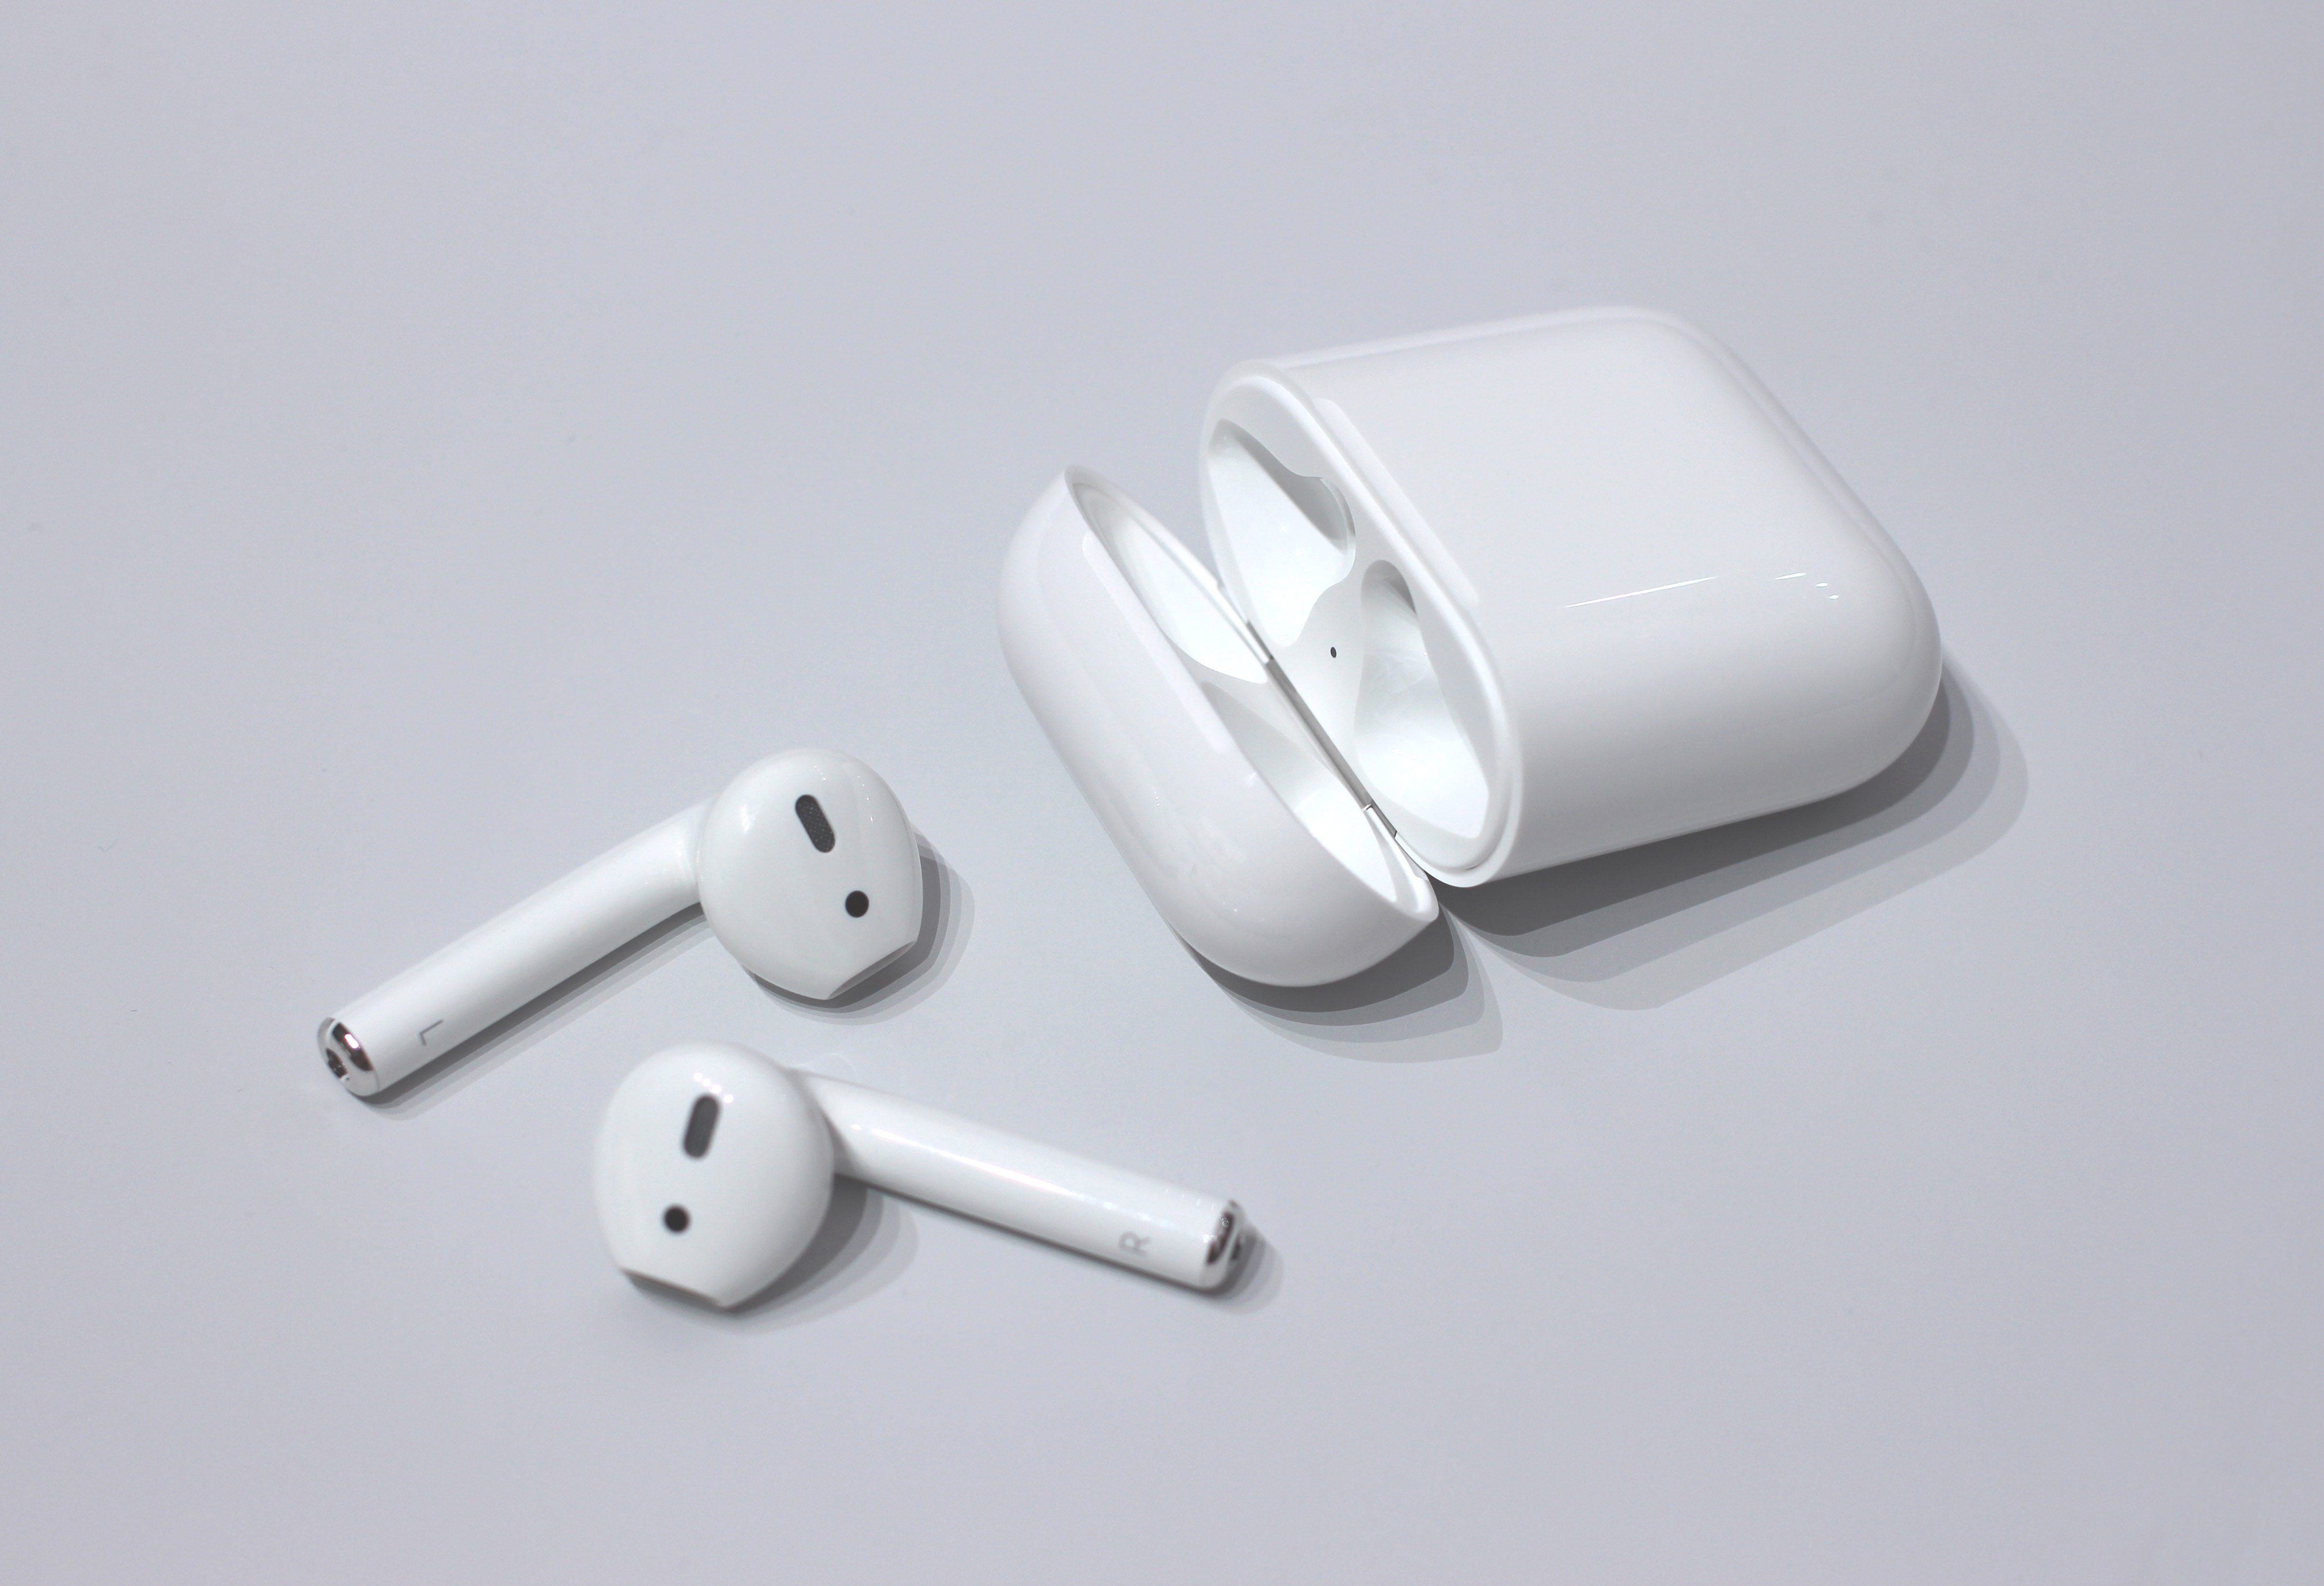 AirPods — Wikipédia